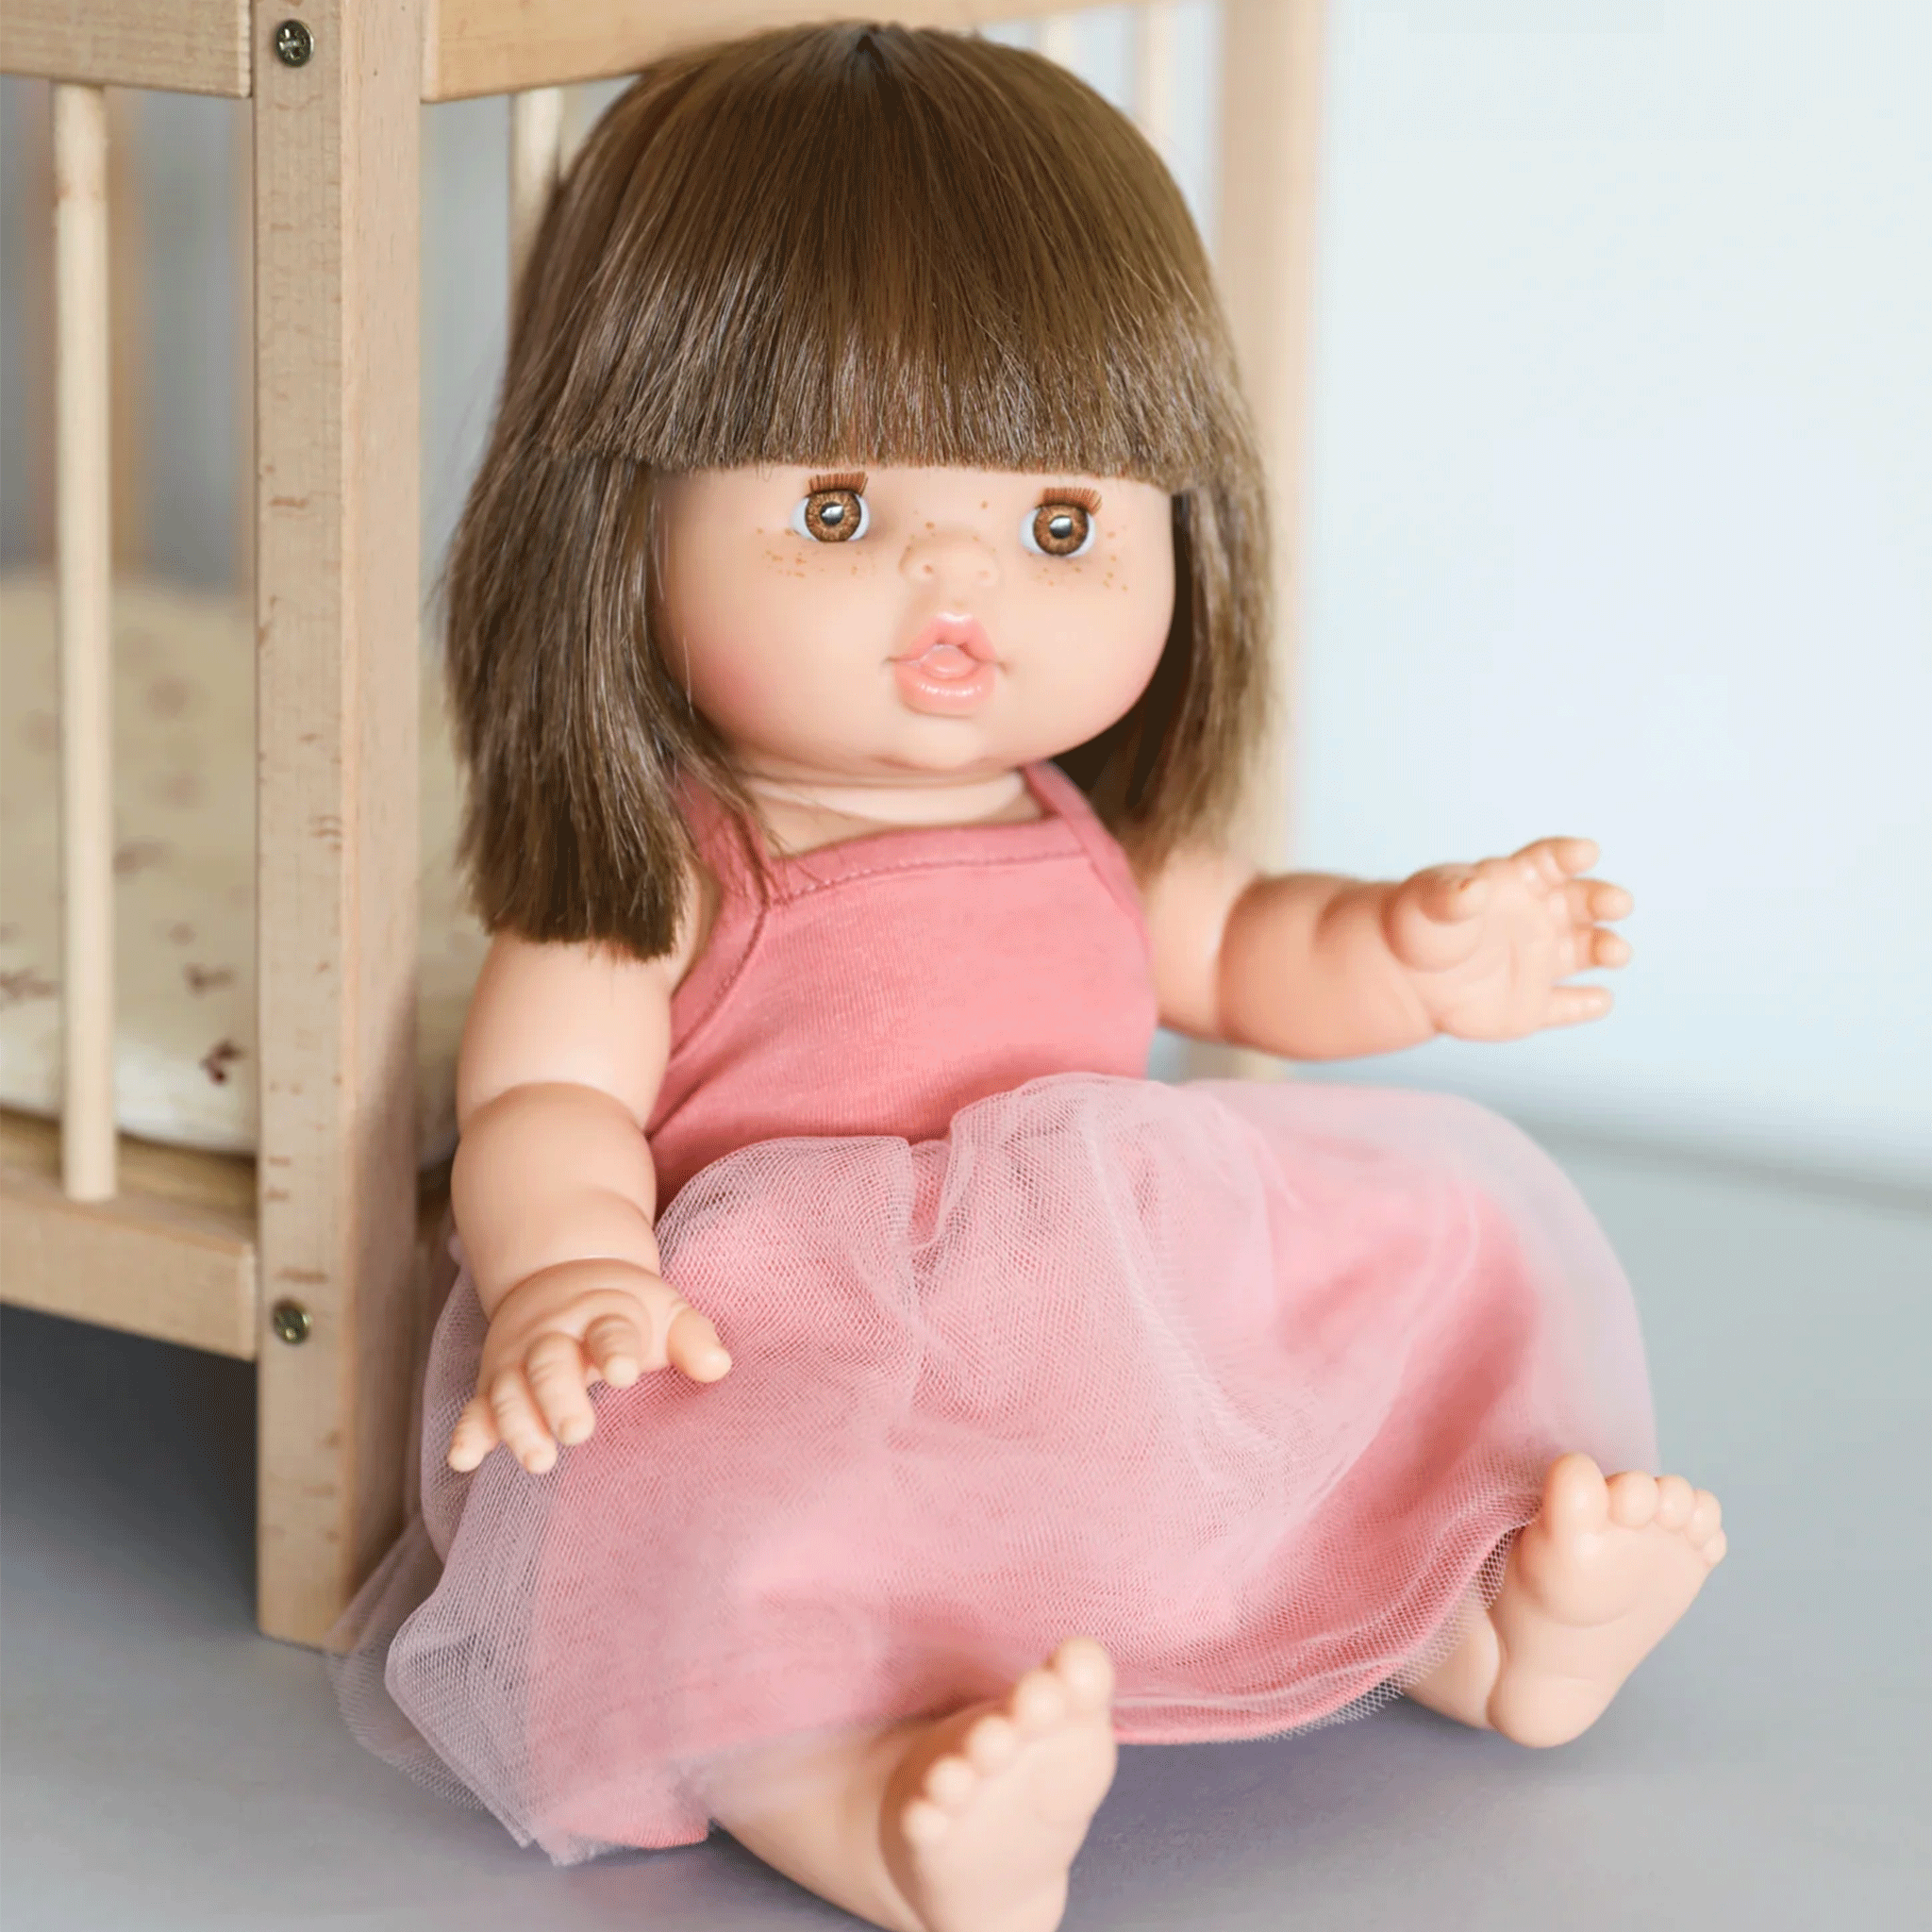 A baby doll with brown straight hair and amber colored eyes.